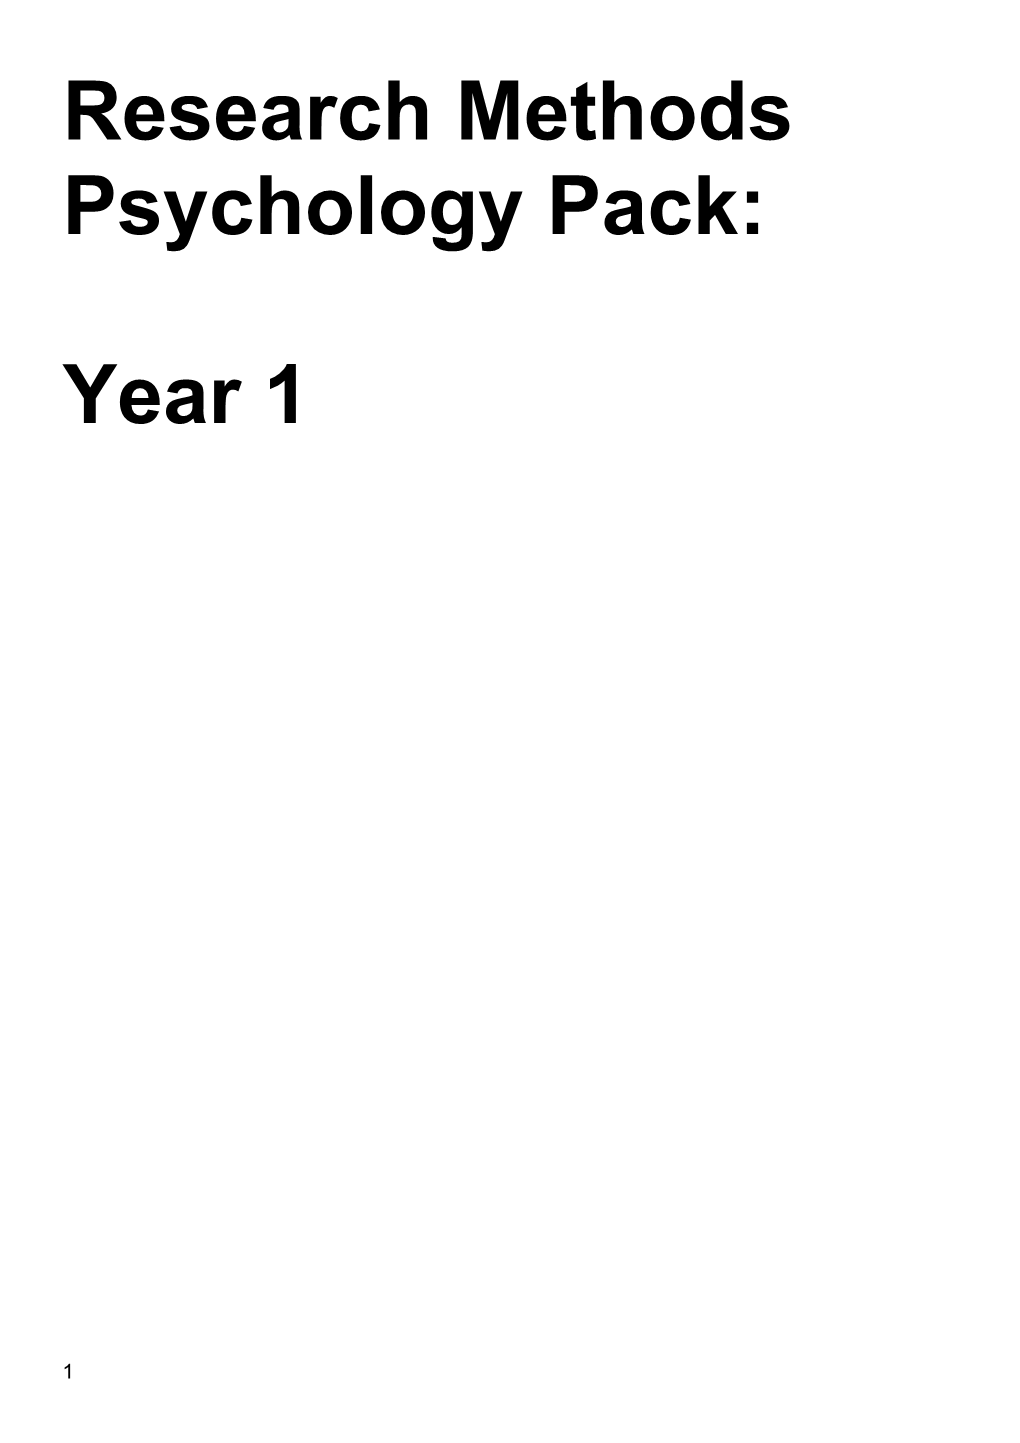 Research Methods Psychology Pack